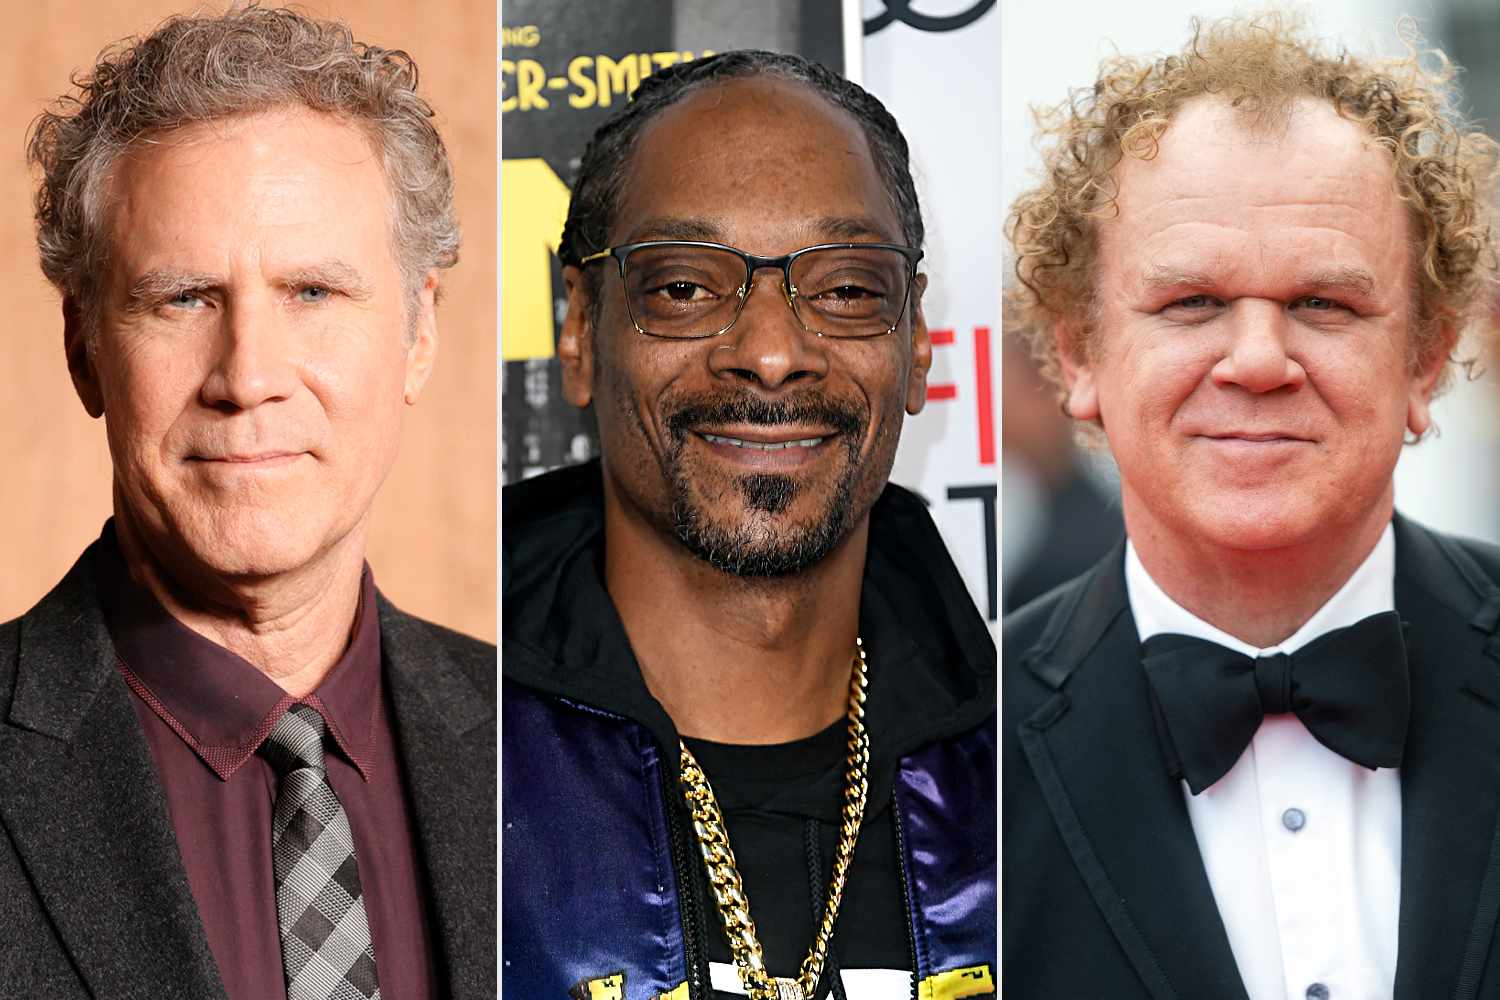 Snoop Dogg Celebrates 52nd Birthday With Will Ferrell And John C. Reilly In Epic Performance